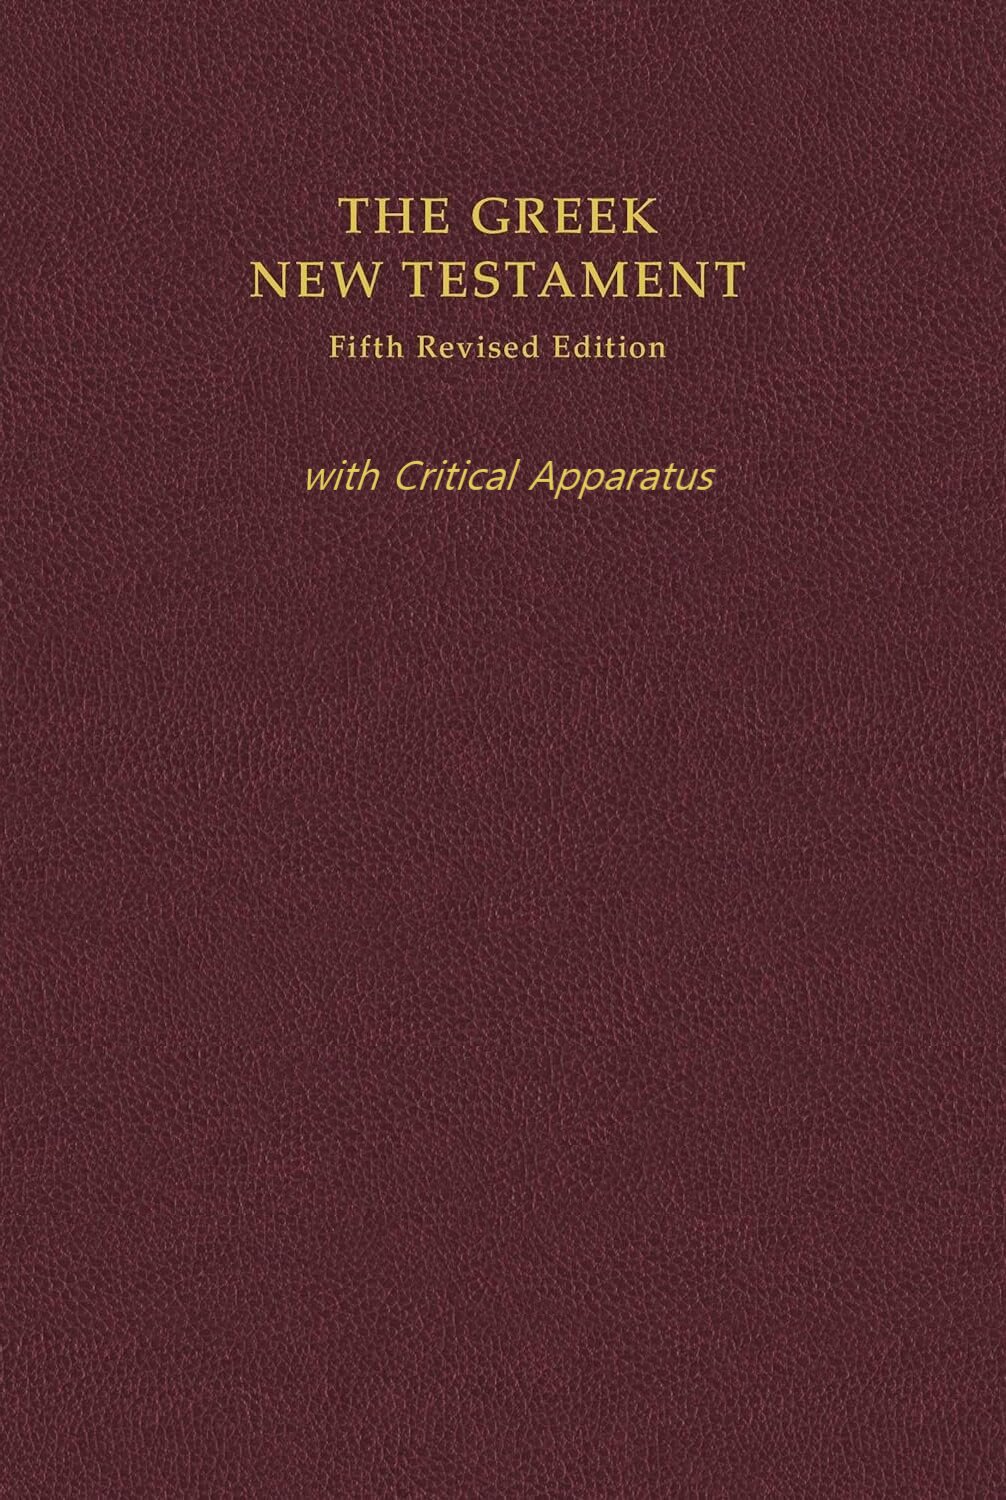 The Greek New Testament, 5th ed. (UBS5) with Critical Apparatus